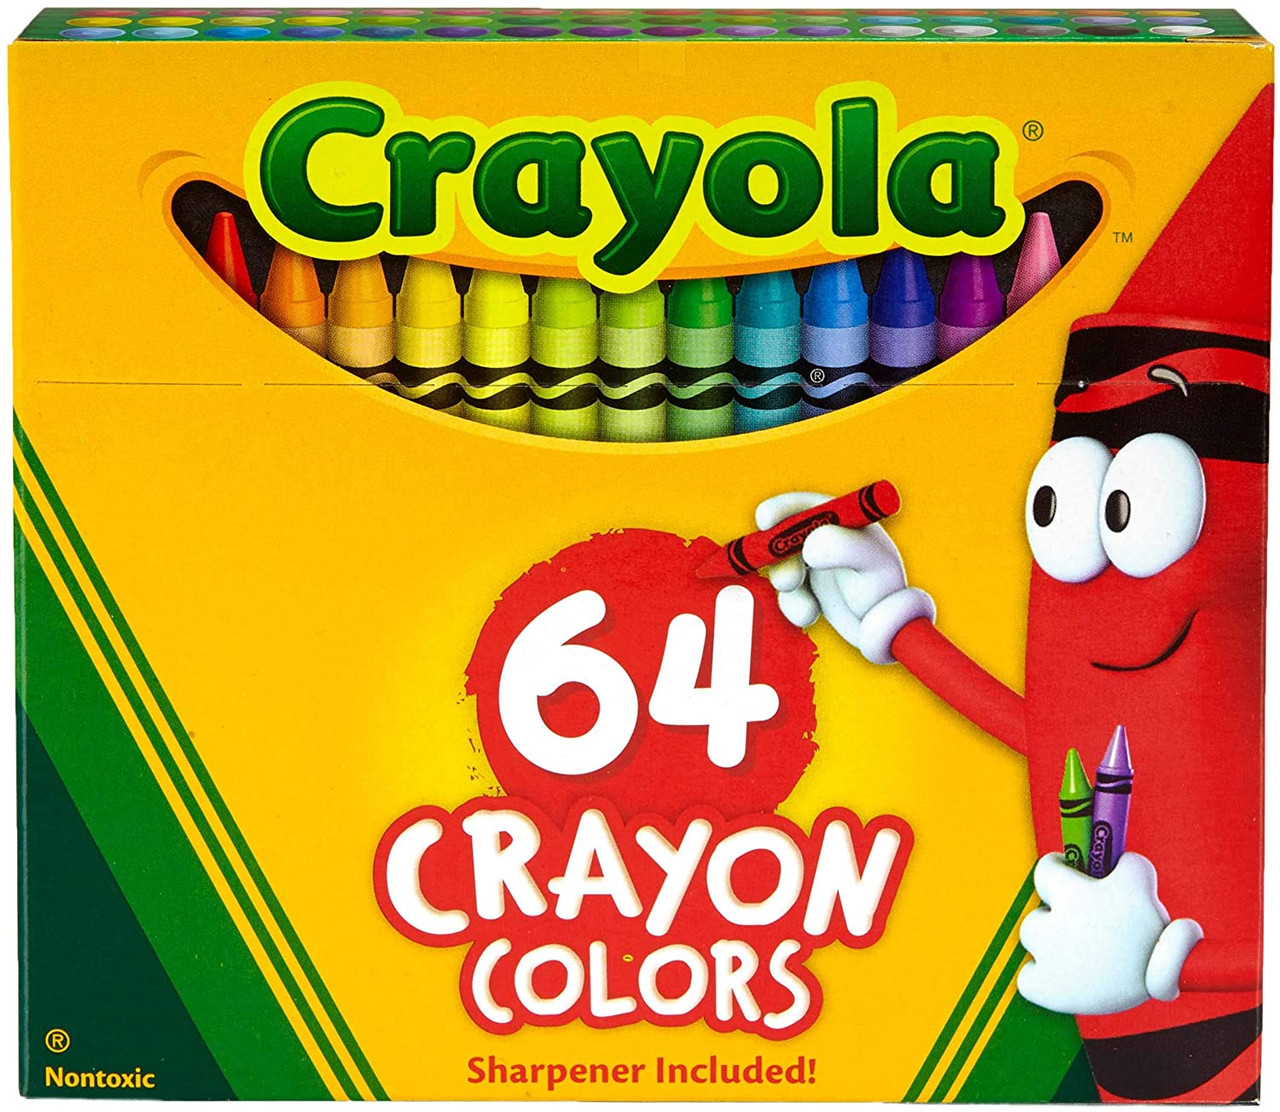 Crayola Crayons Peggable 24 Pack CY52-3024